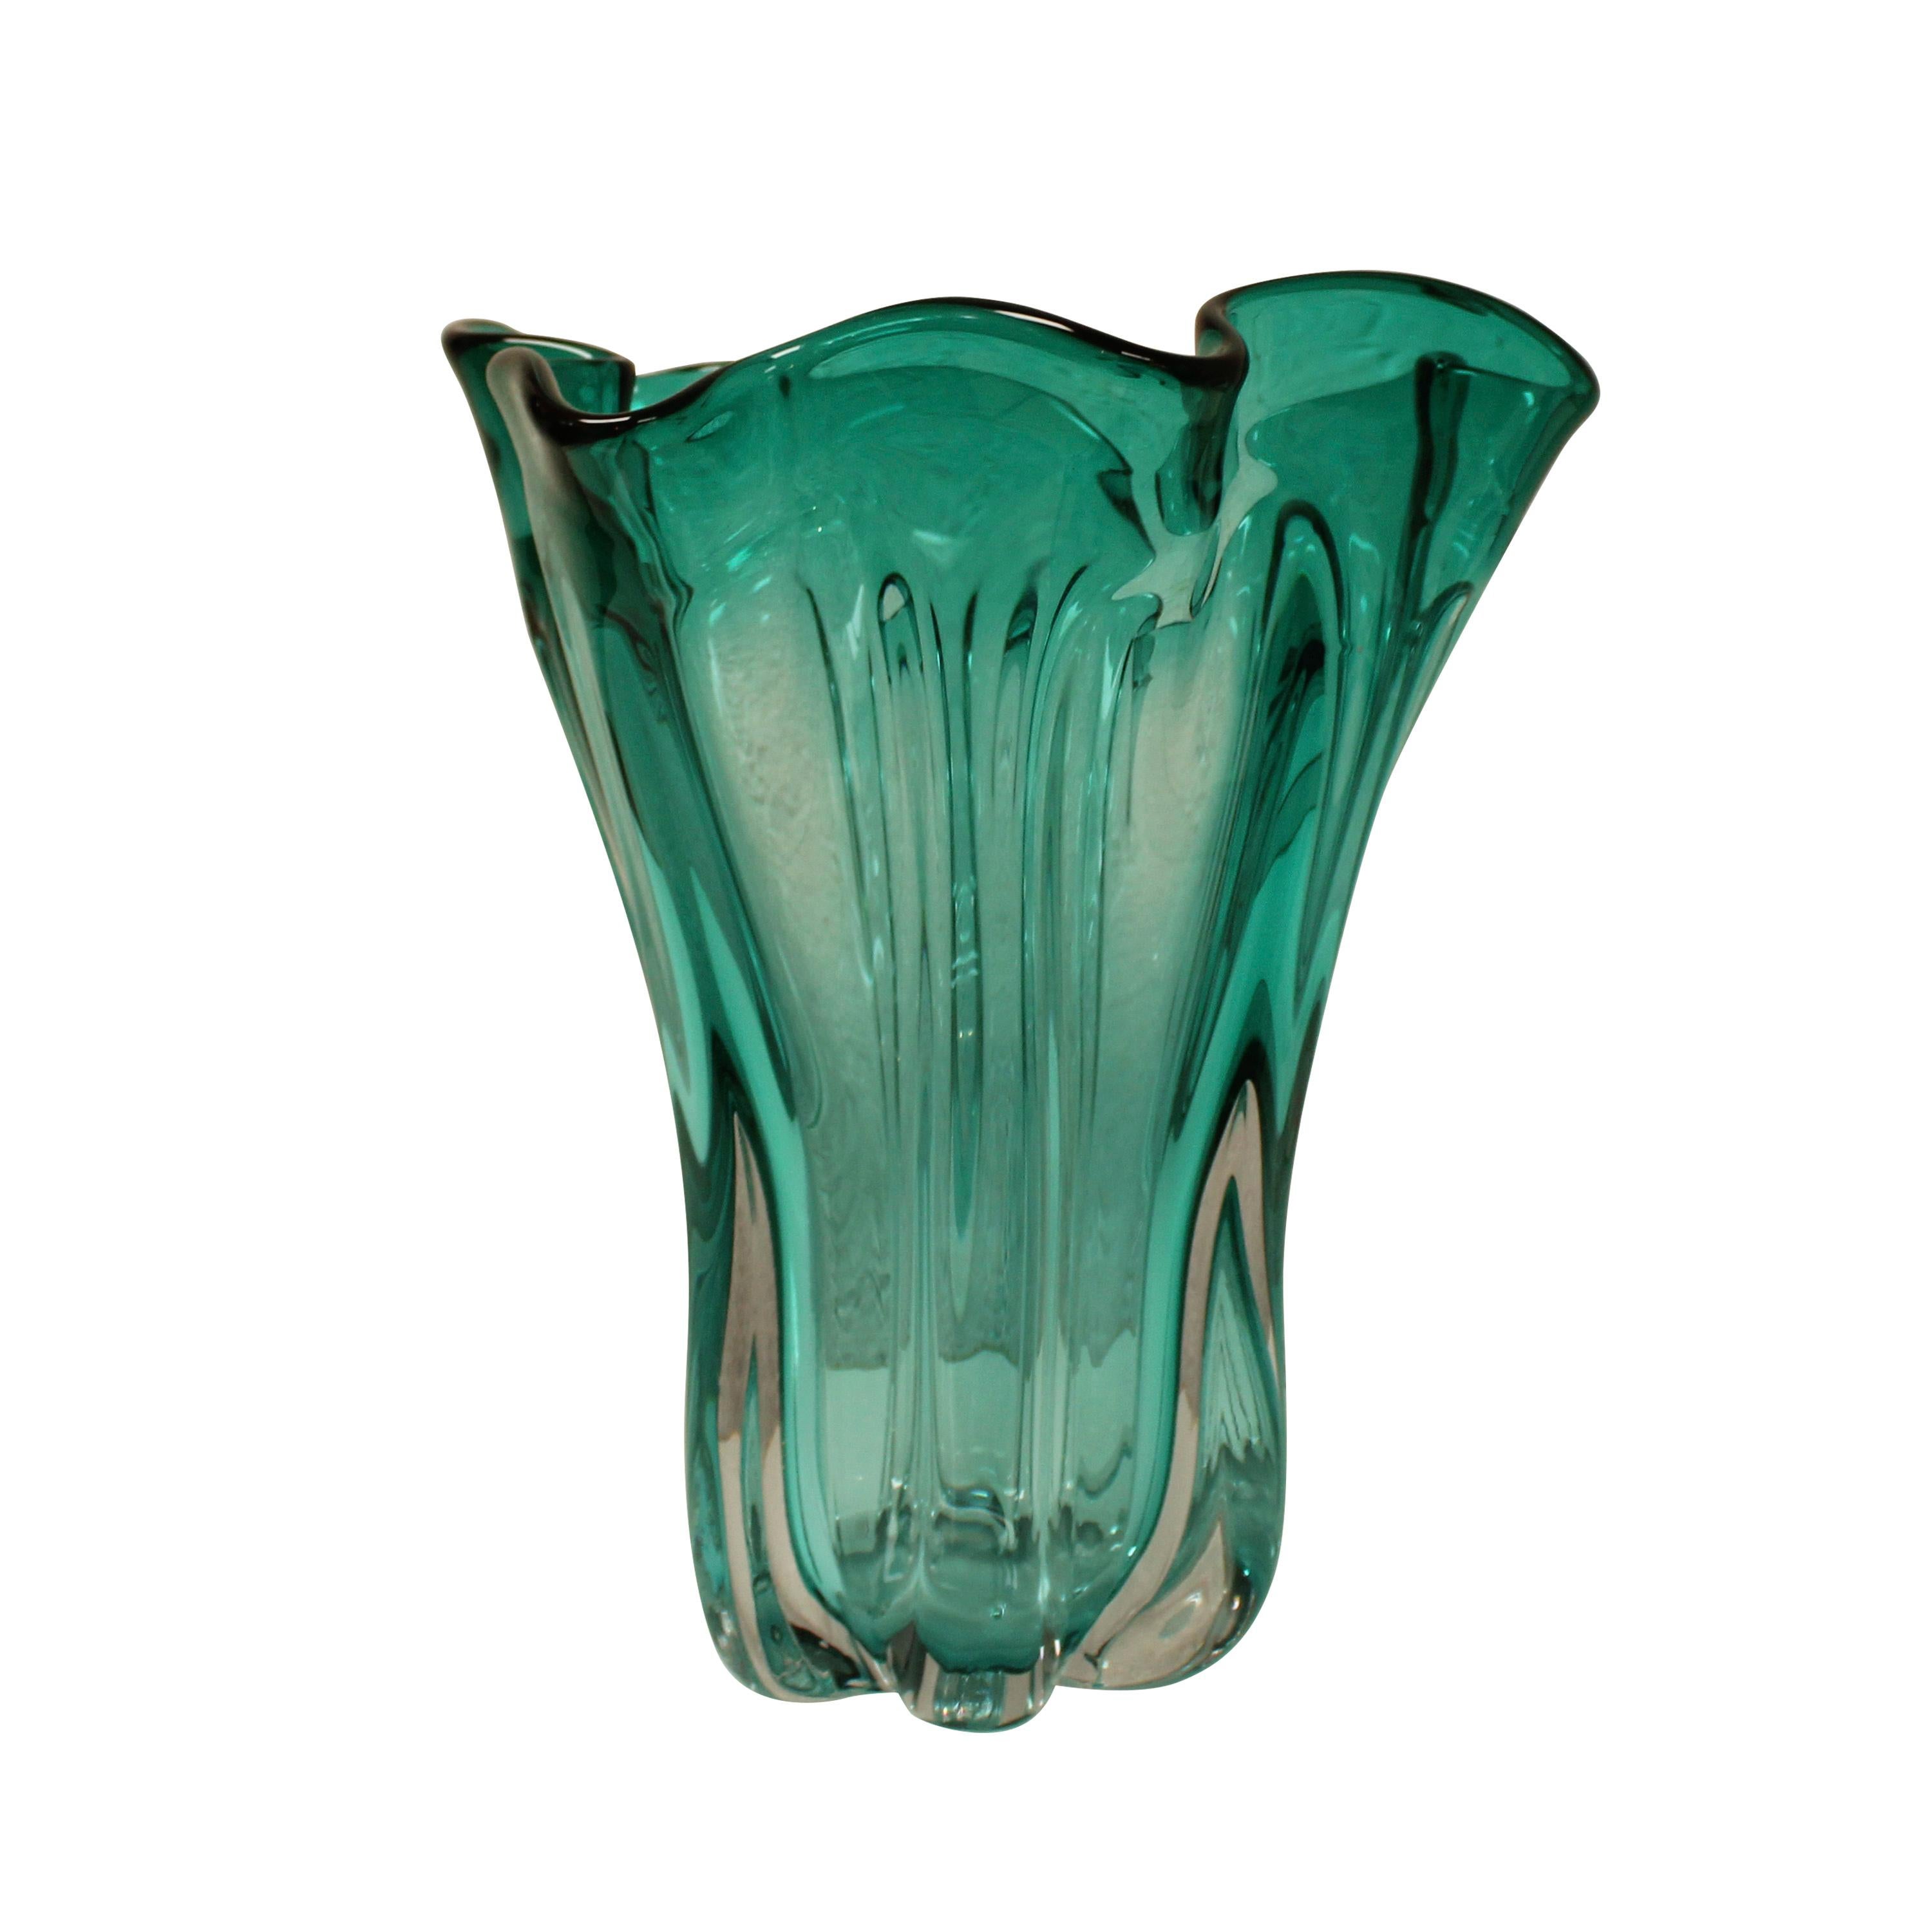 Hand-blown Italian turquoise semi-transparent glass vase with an organic nature-inspired shape.